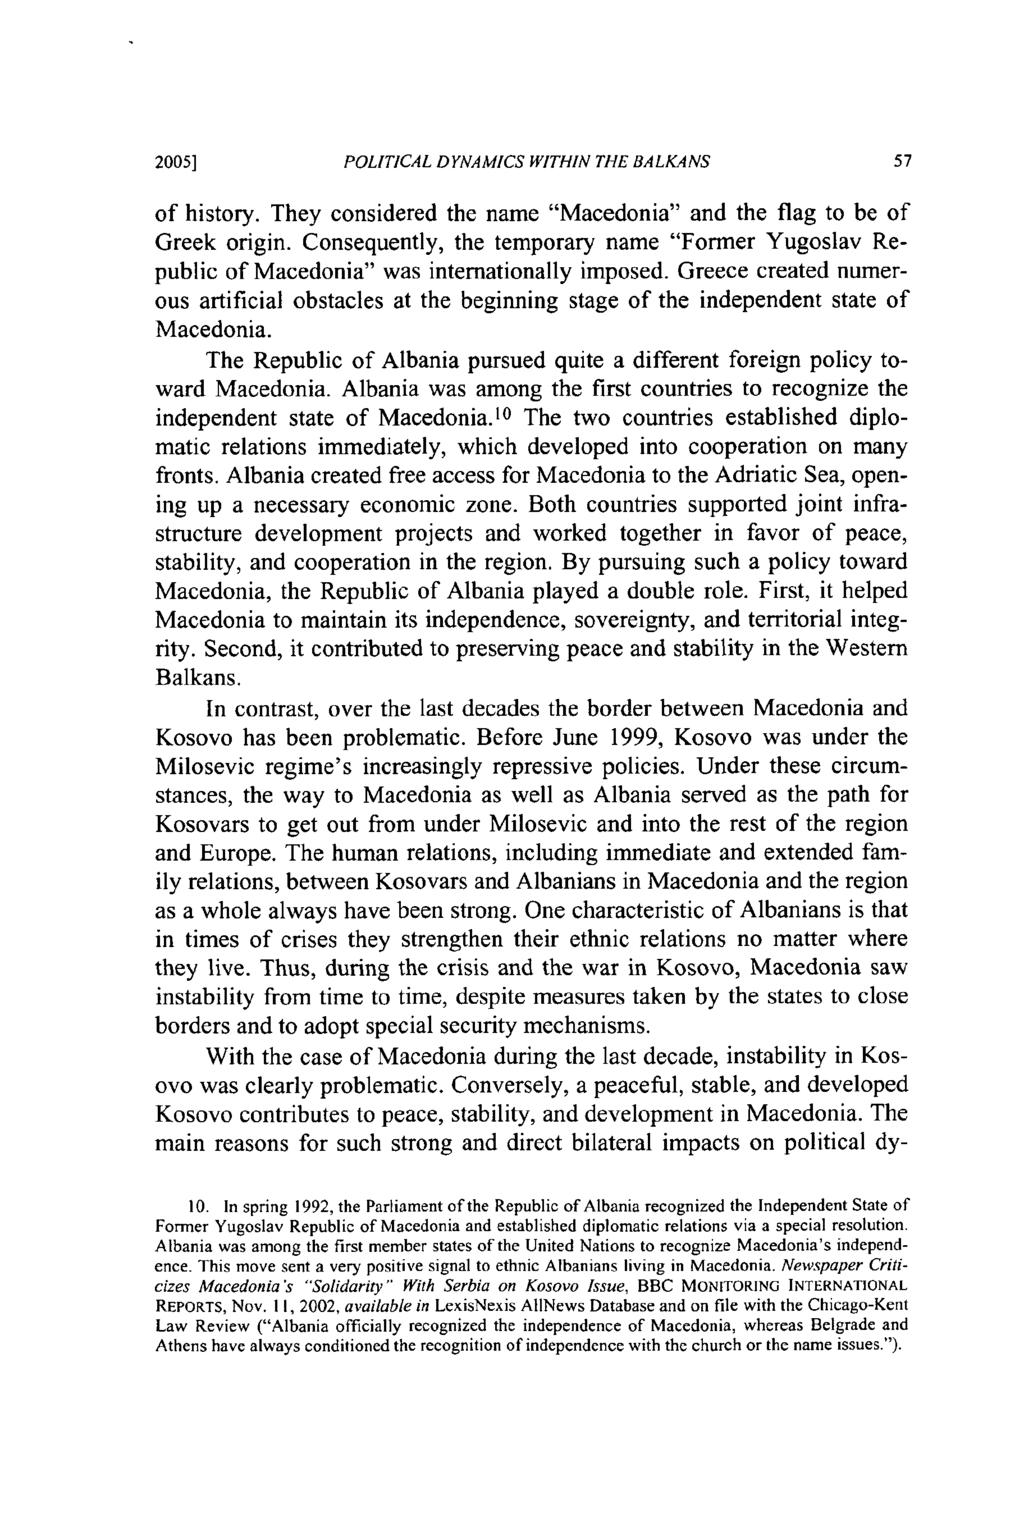 2005] POLITICAL DYNAMICS WITHIN THE BALKANS of history. They considered the name "Macedonia" and the flag to be of Greek origin.